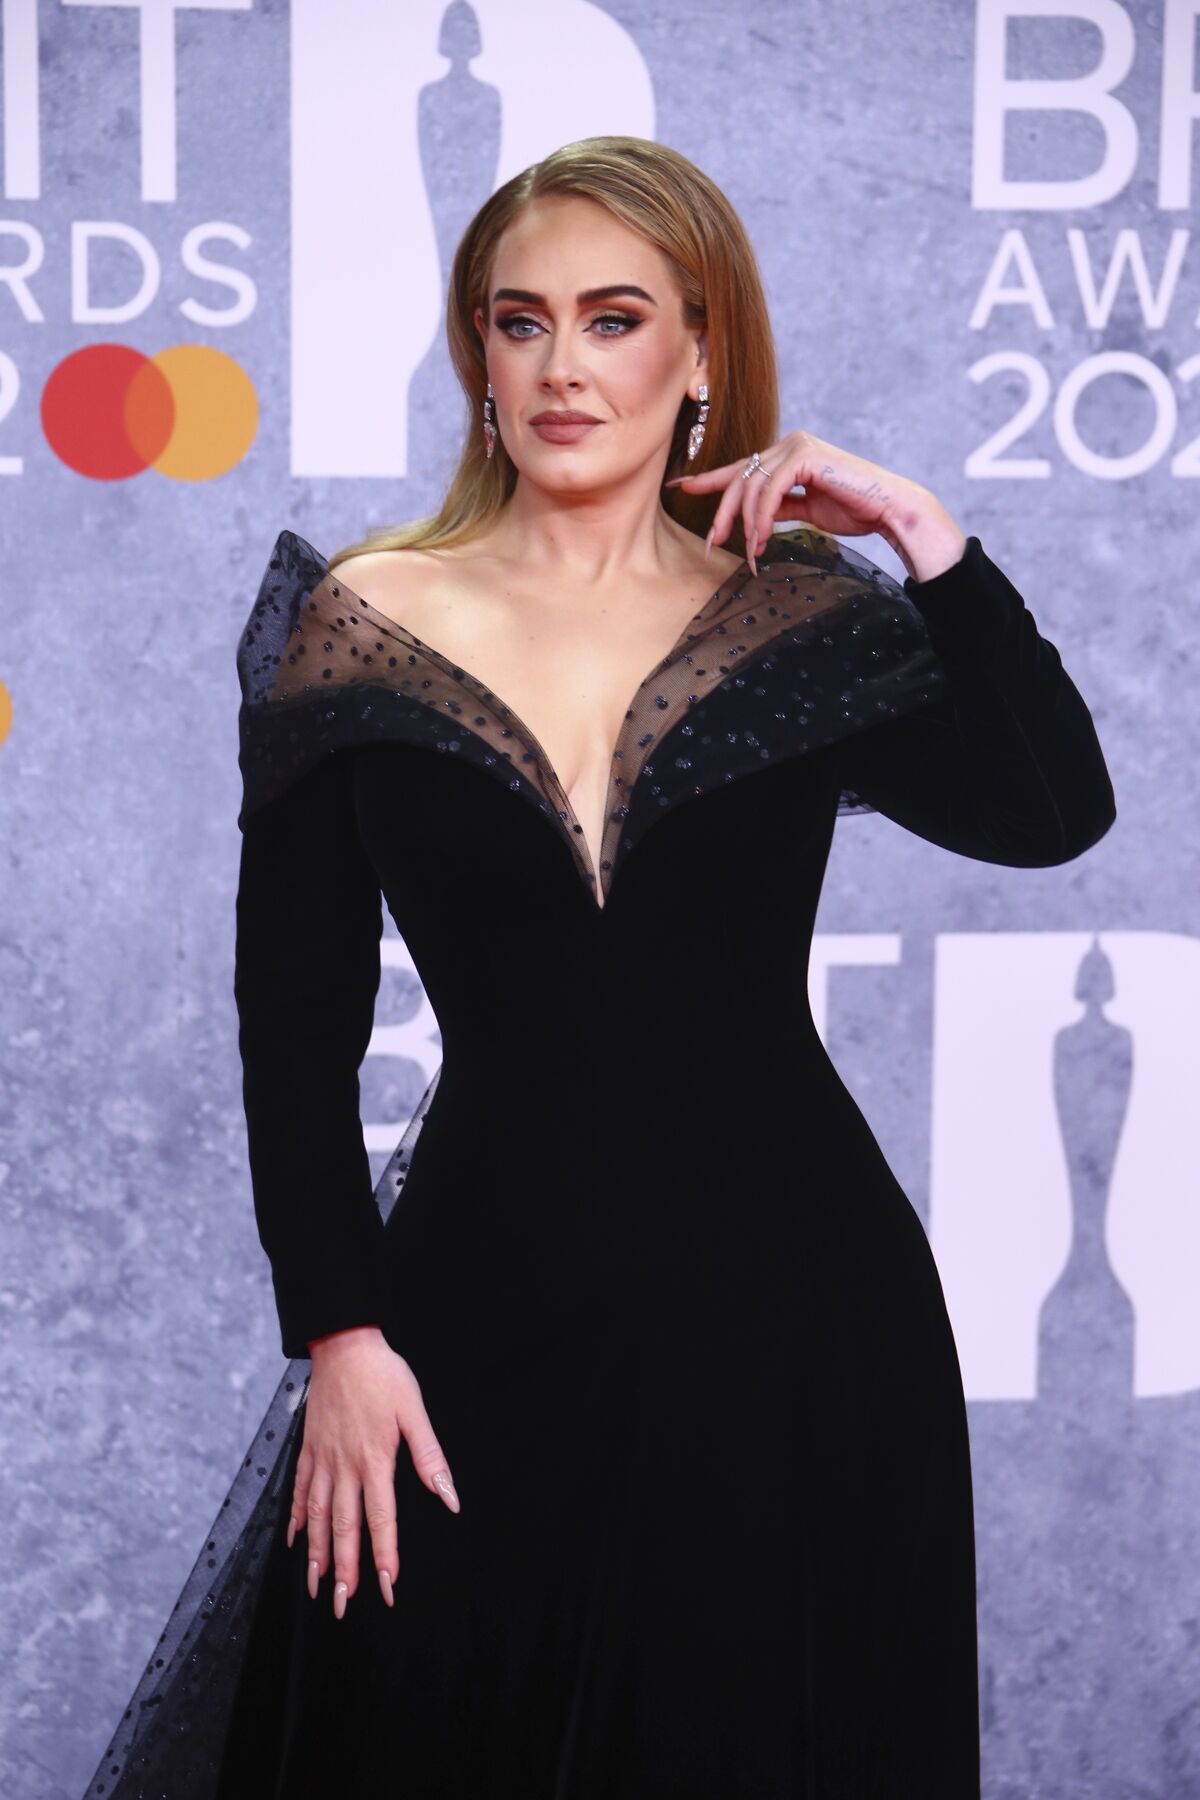 A woman poses in a black gown at a red-carpet event